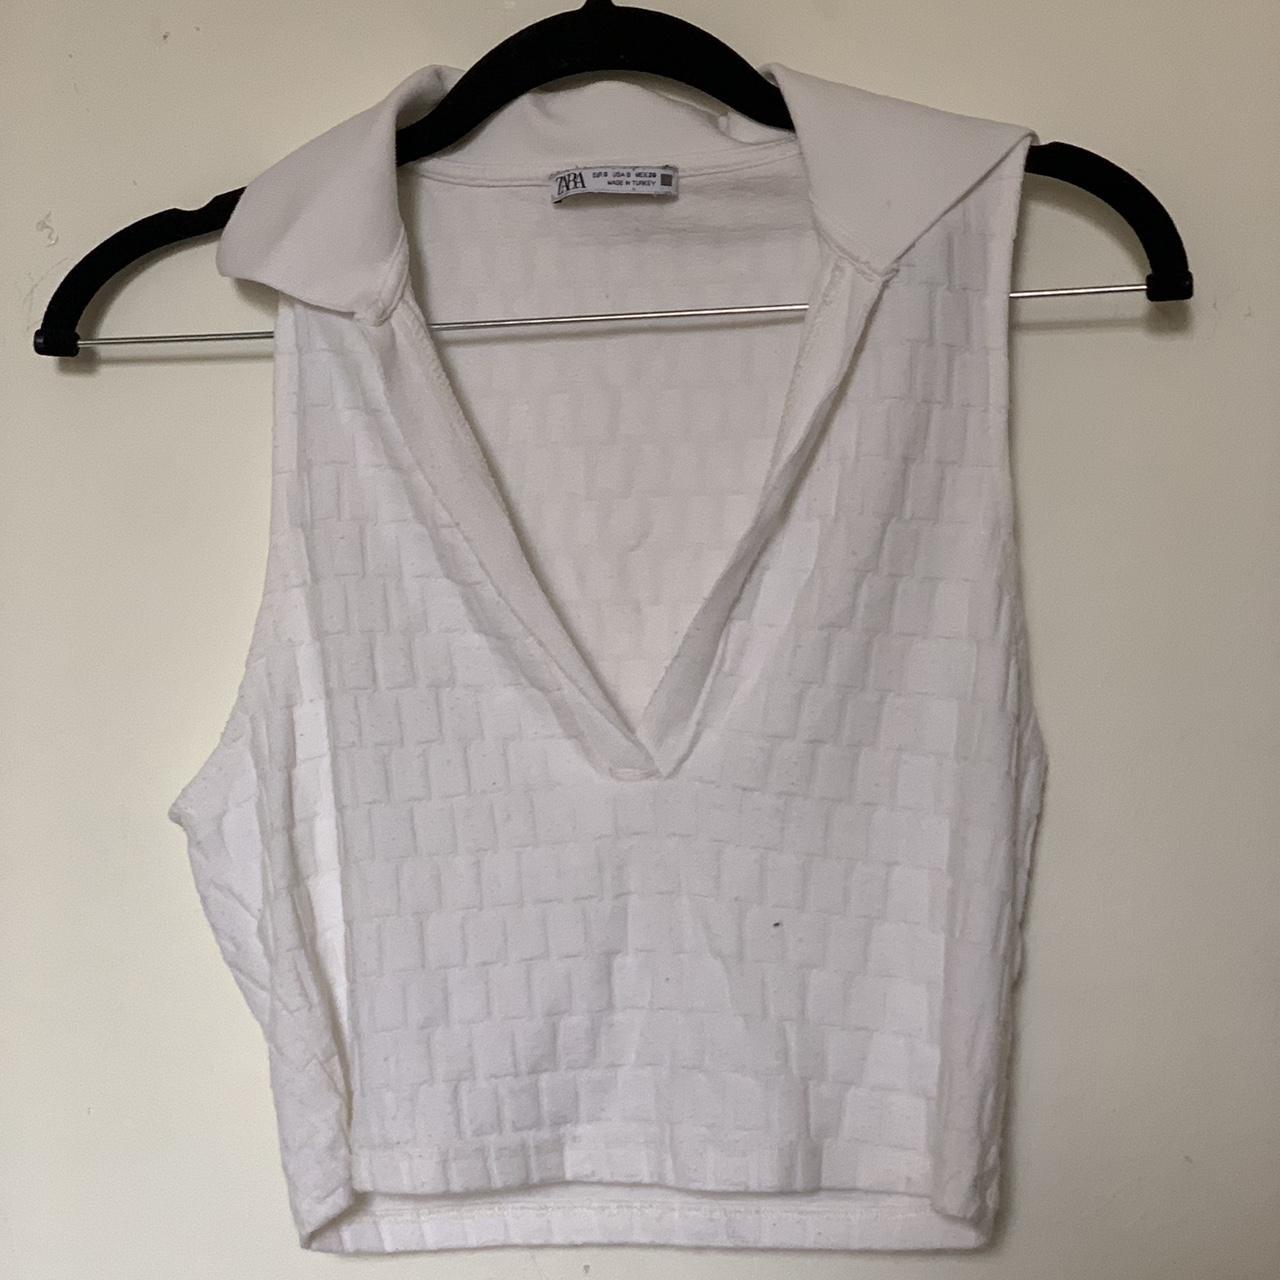 Zara white collared top, really comfortable and... - Depop